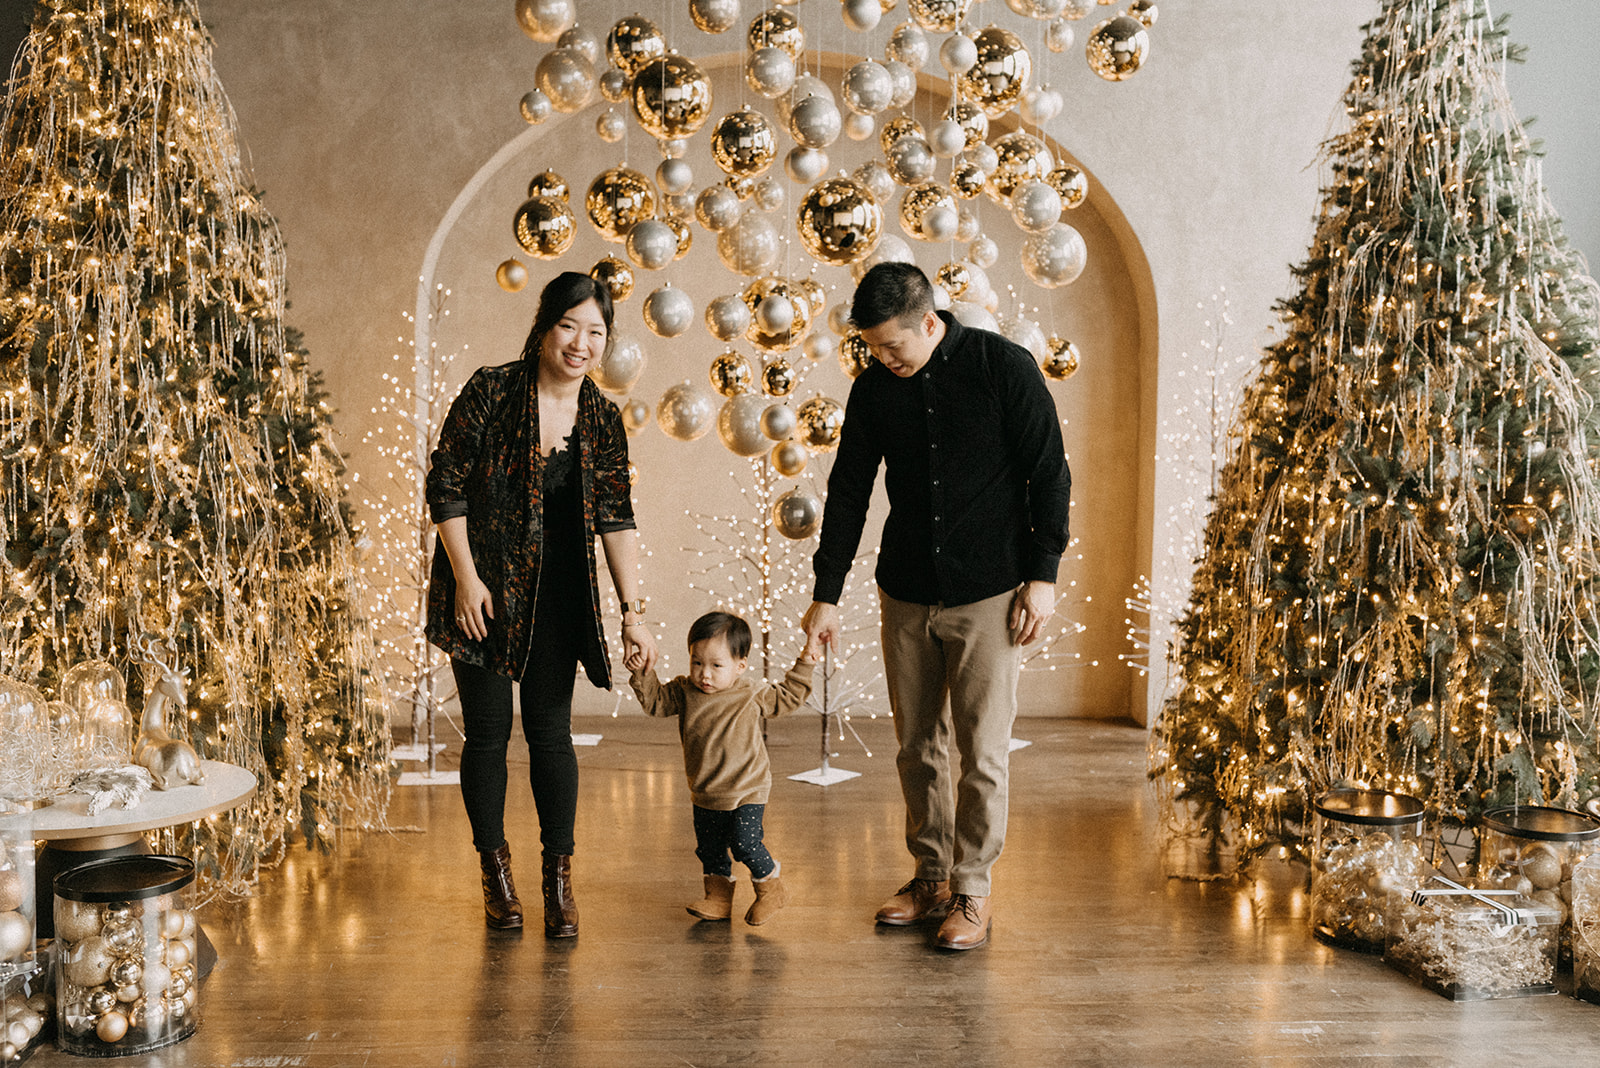 Parents walking with their toddler son in Mintroom studio decorated with golden ornaments